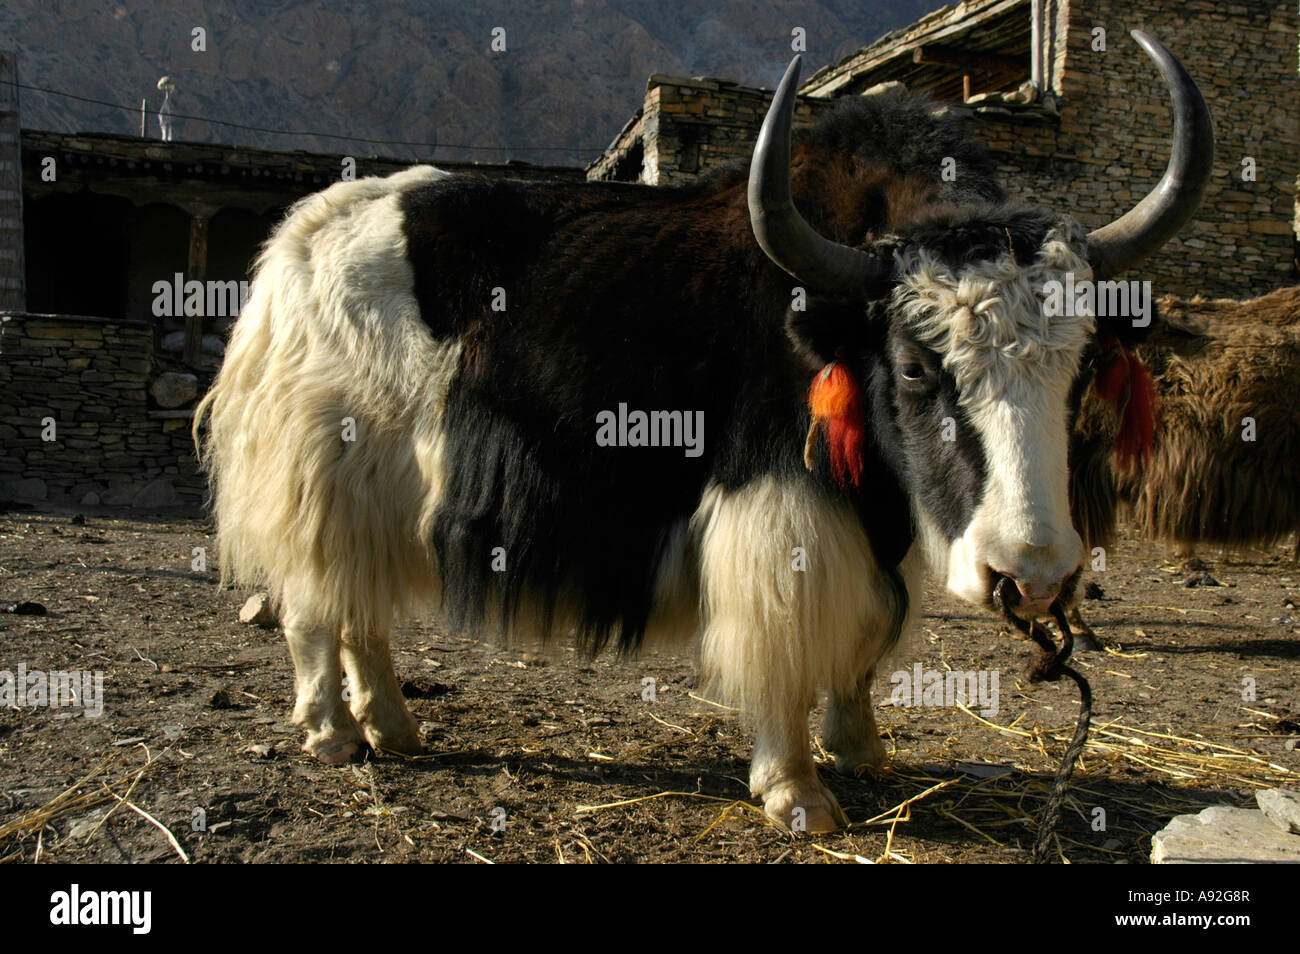 Yak with red tassels hanging from its ears and a big head Nar Nar-Phu Annapurna Region Nepal Stock Photo